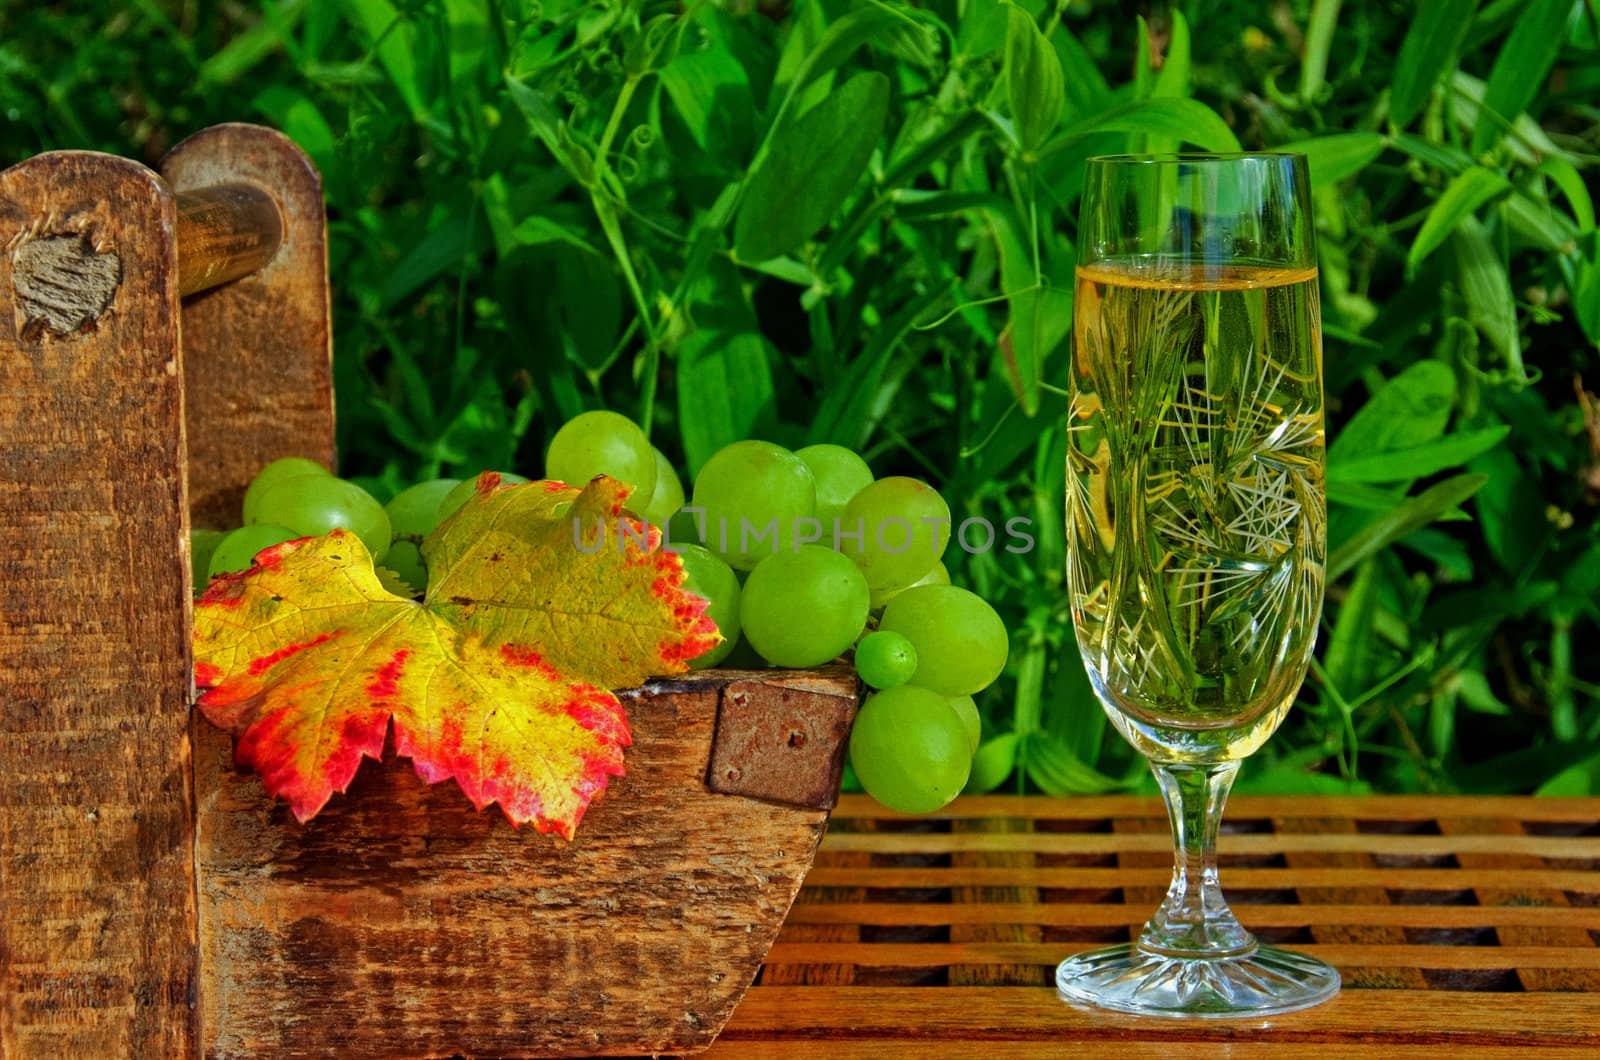 Wine and grapes in garden by GryT